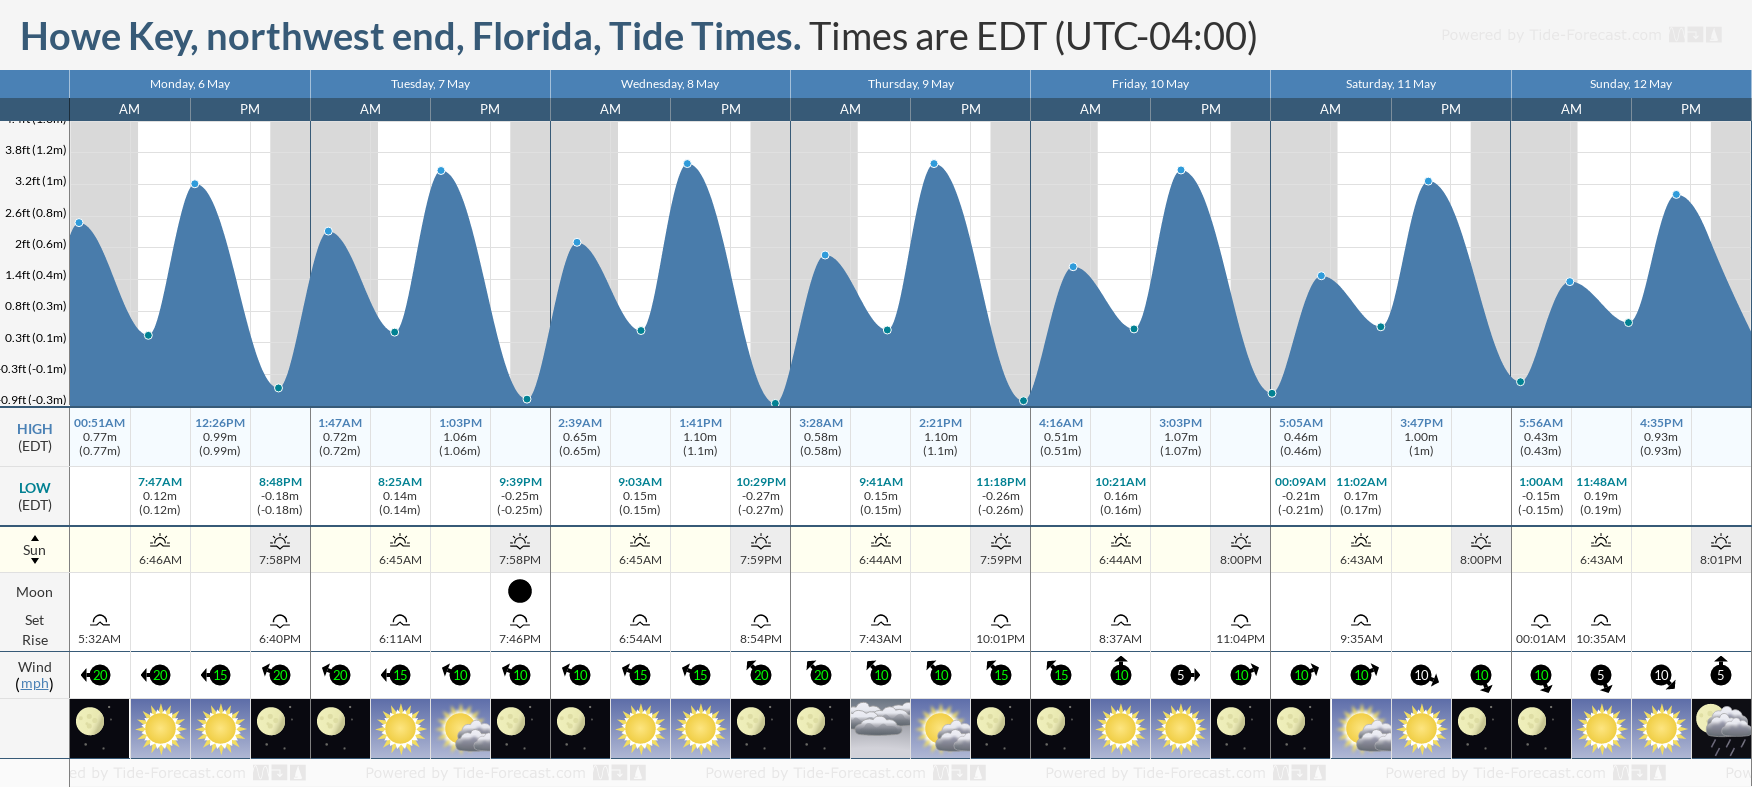 Howe Key, northwest end, Florida Tide Chart including high and low tide tide times for the next 7 days